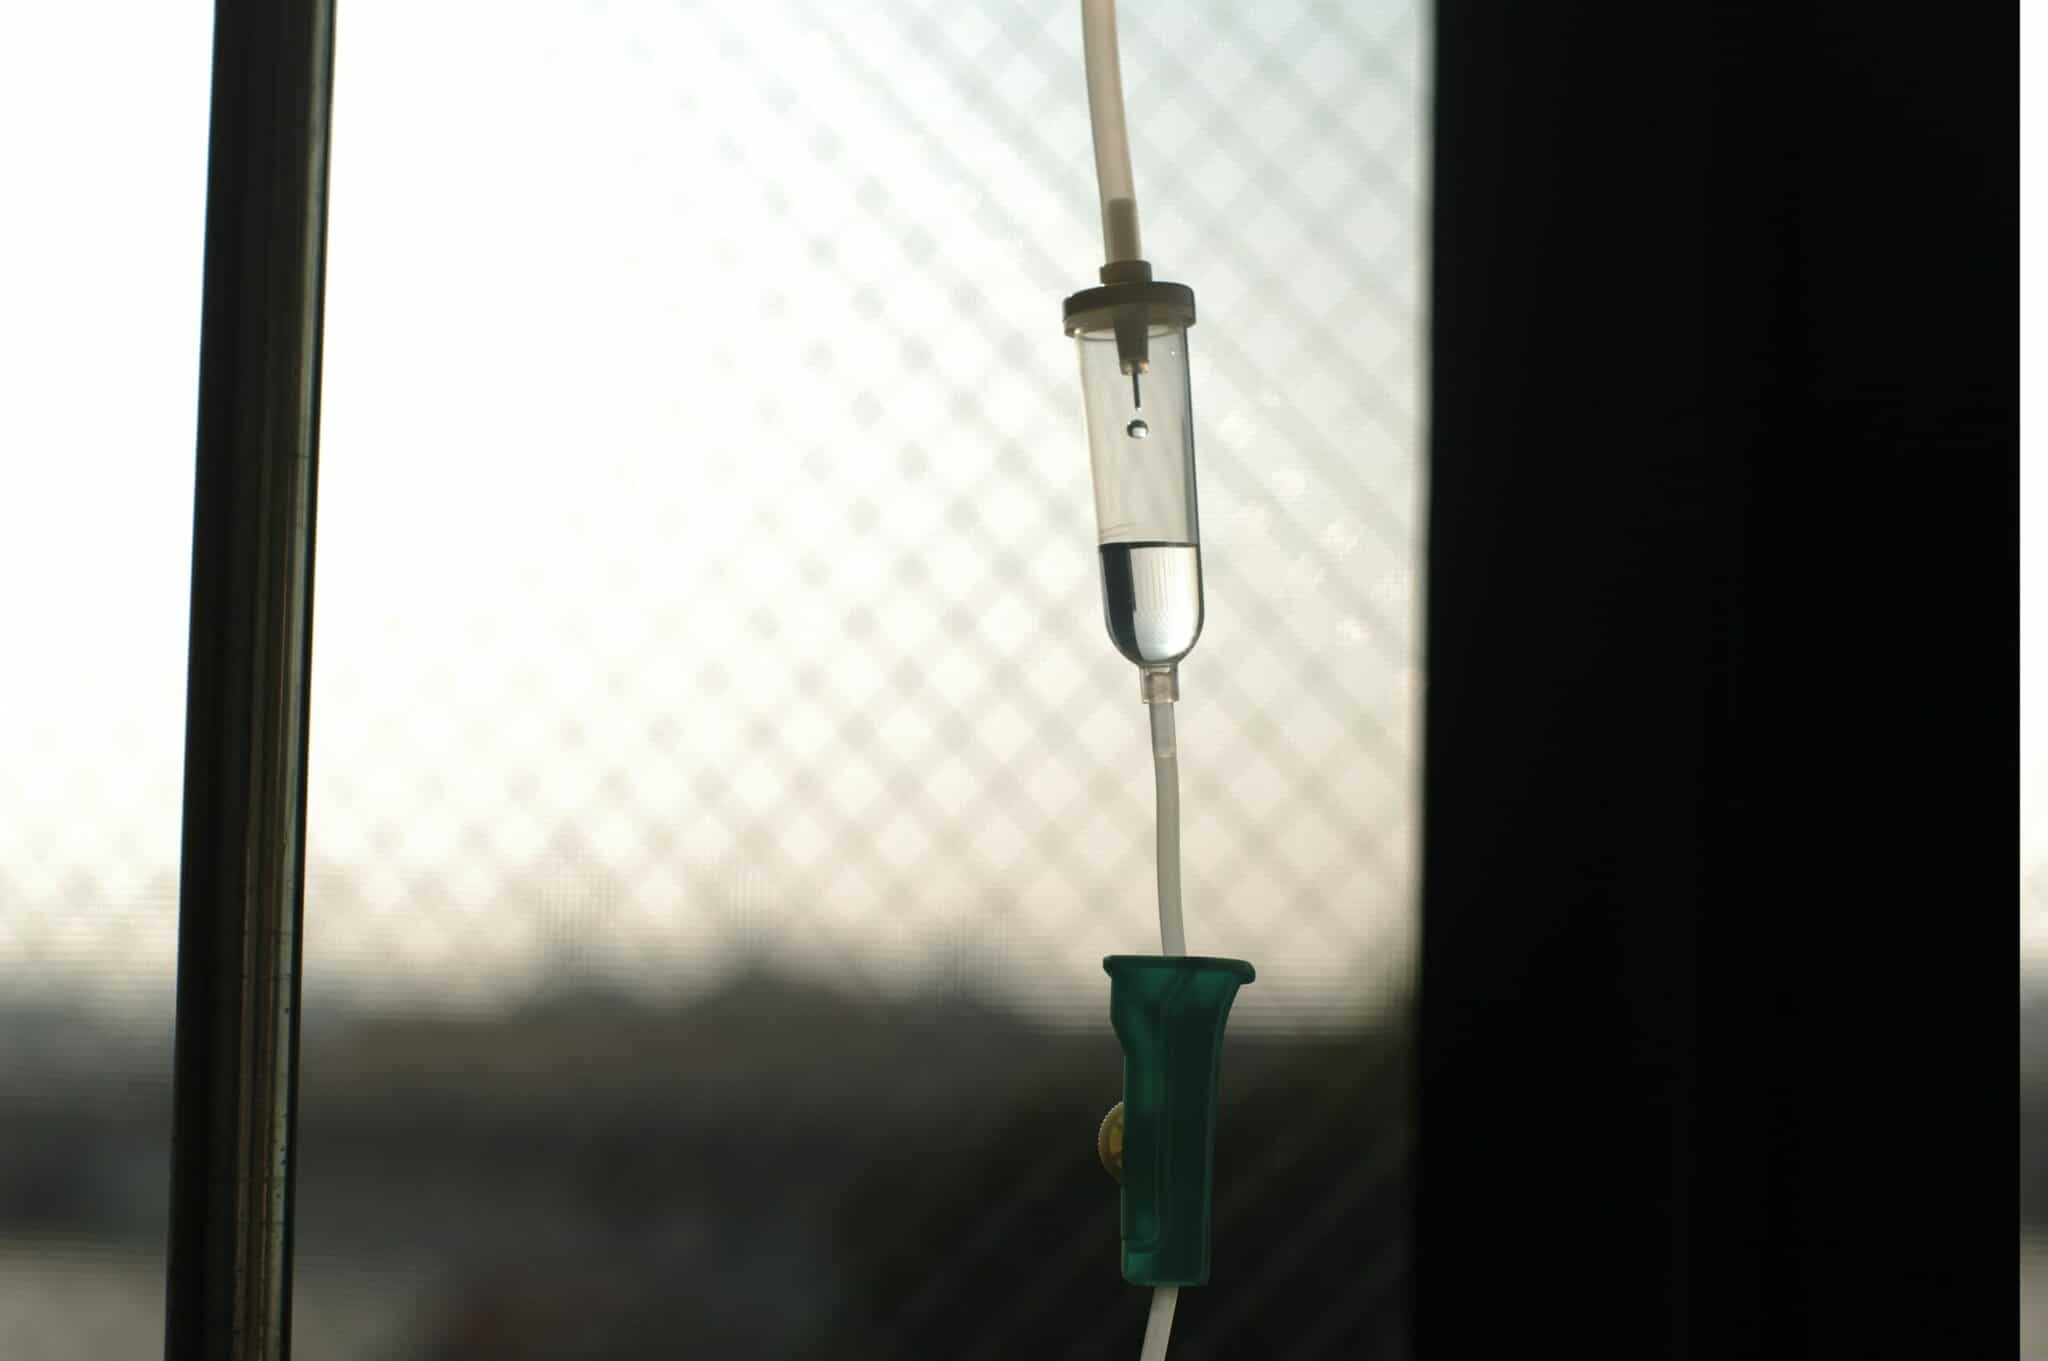 An image of an IV and the dangers of detoxing at home